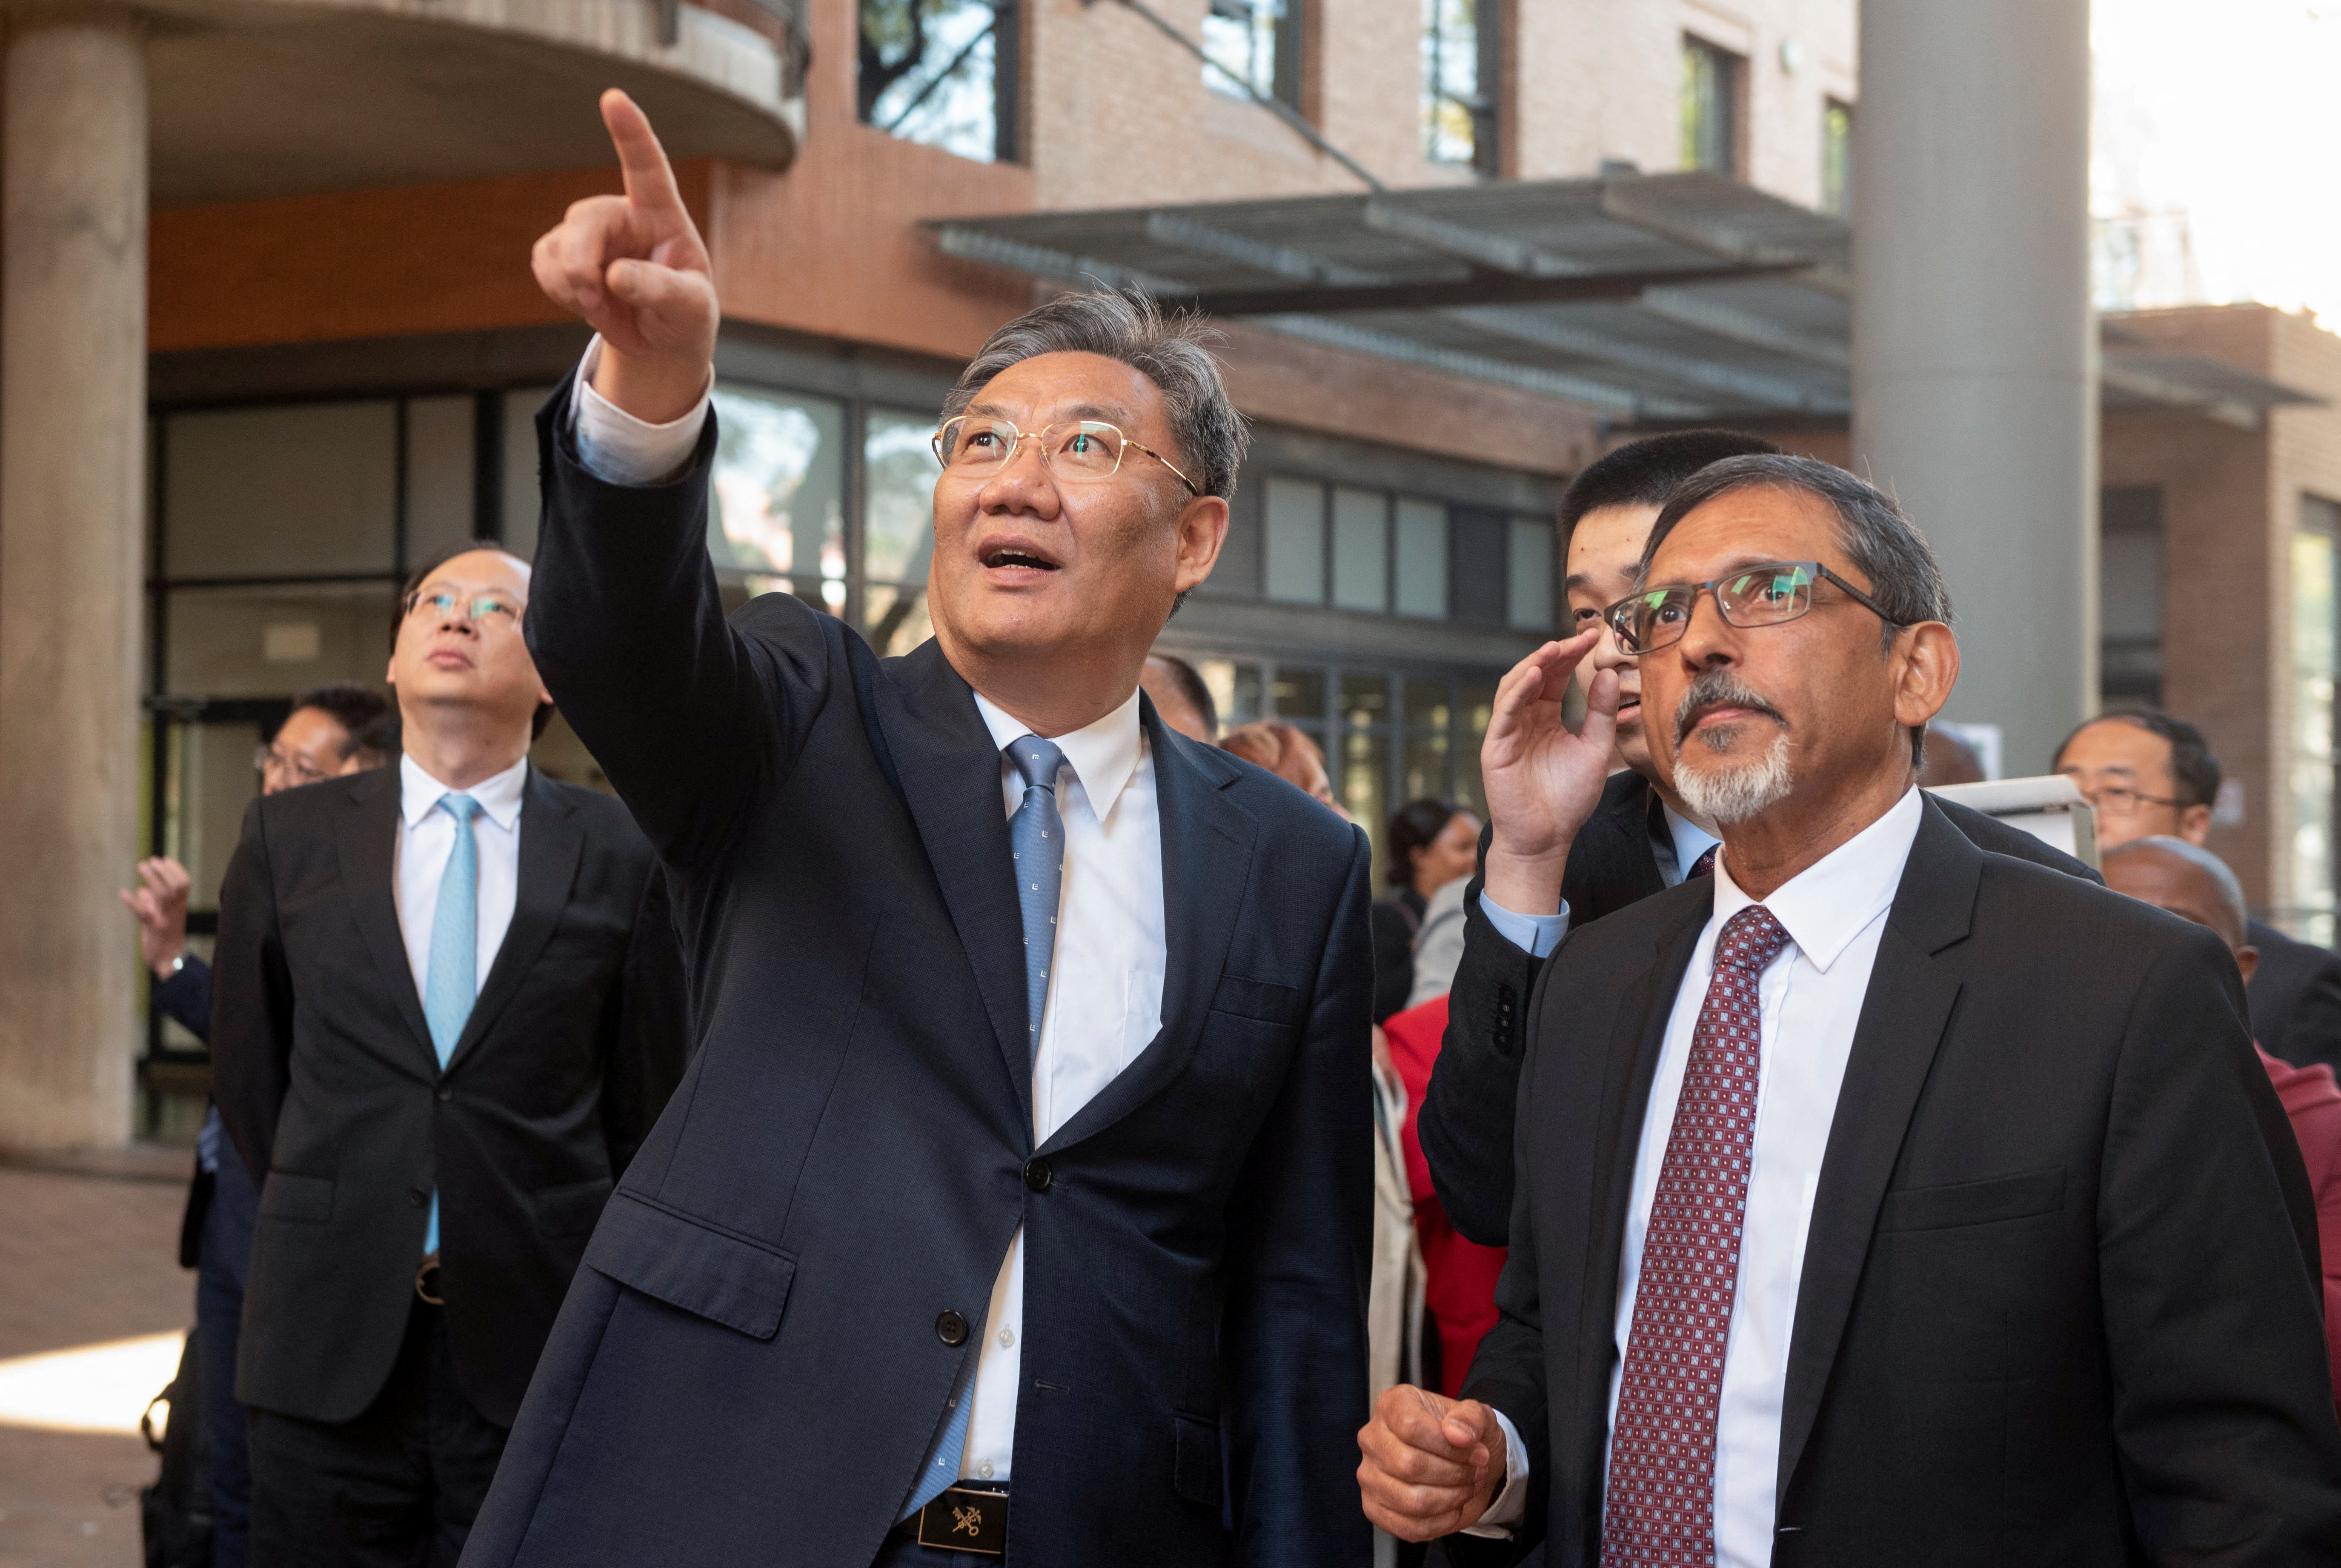 China's Minister of Commerce Wang Wentao gestures as South Africa's Minister of Trade, Industry and Competition Ebrahim Patel shows him the Department of Trade, Industry, and Competition's campus in Pretoria